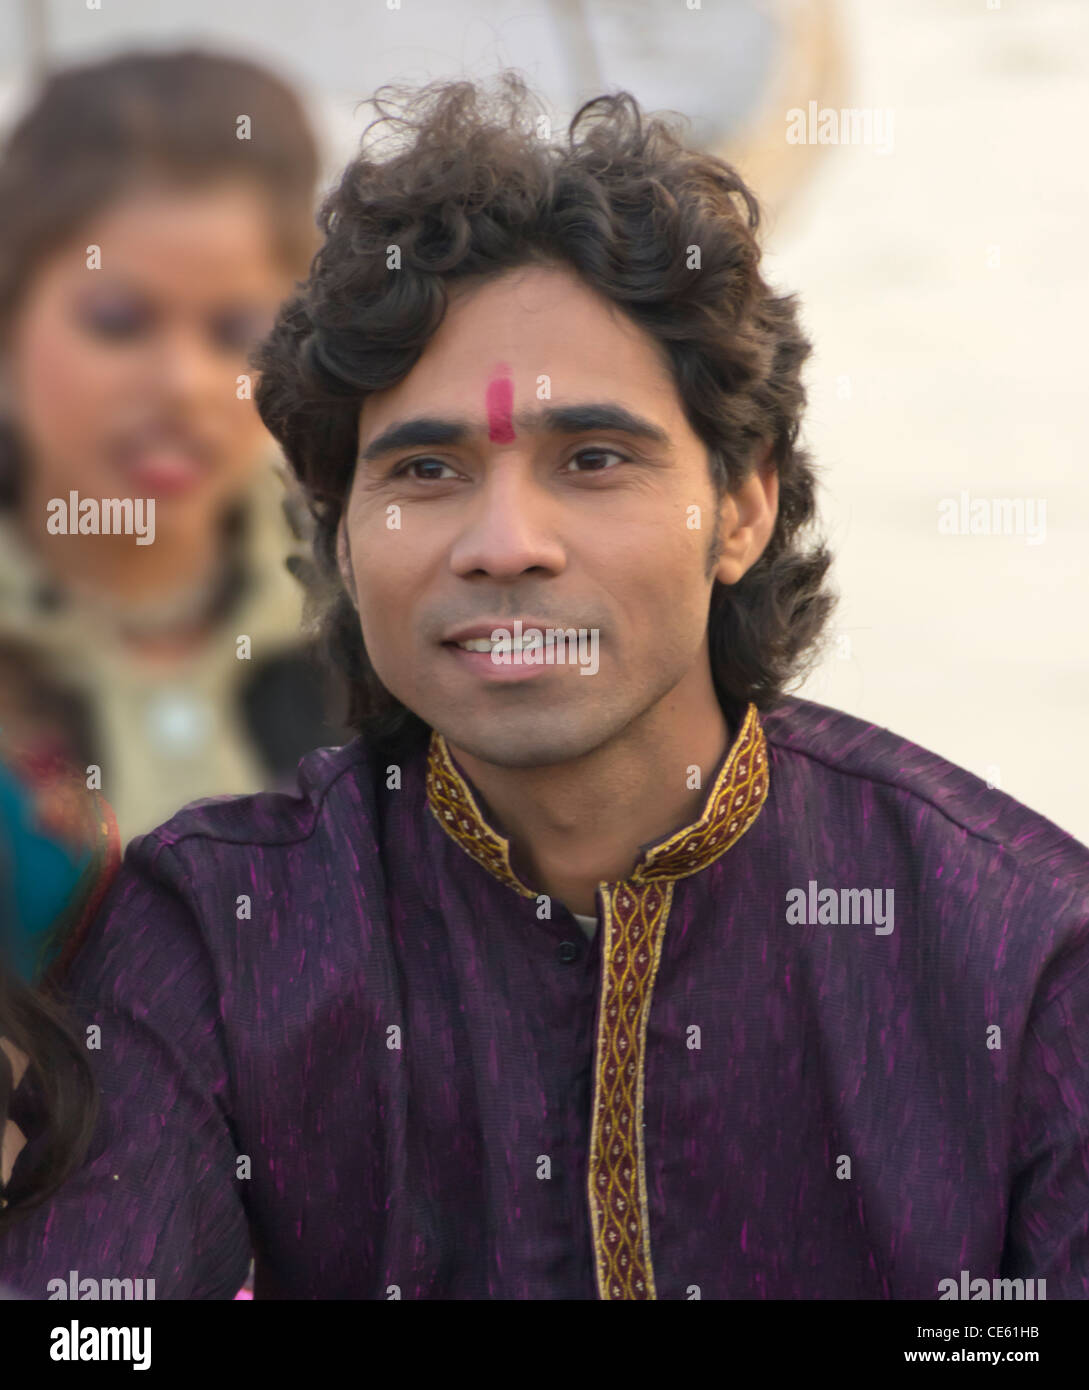 a young confident smiling man regional Indian actor with tilak on his forehead Stock Photo